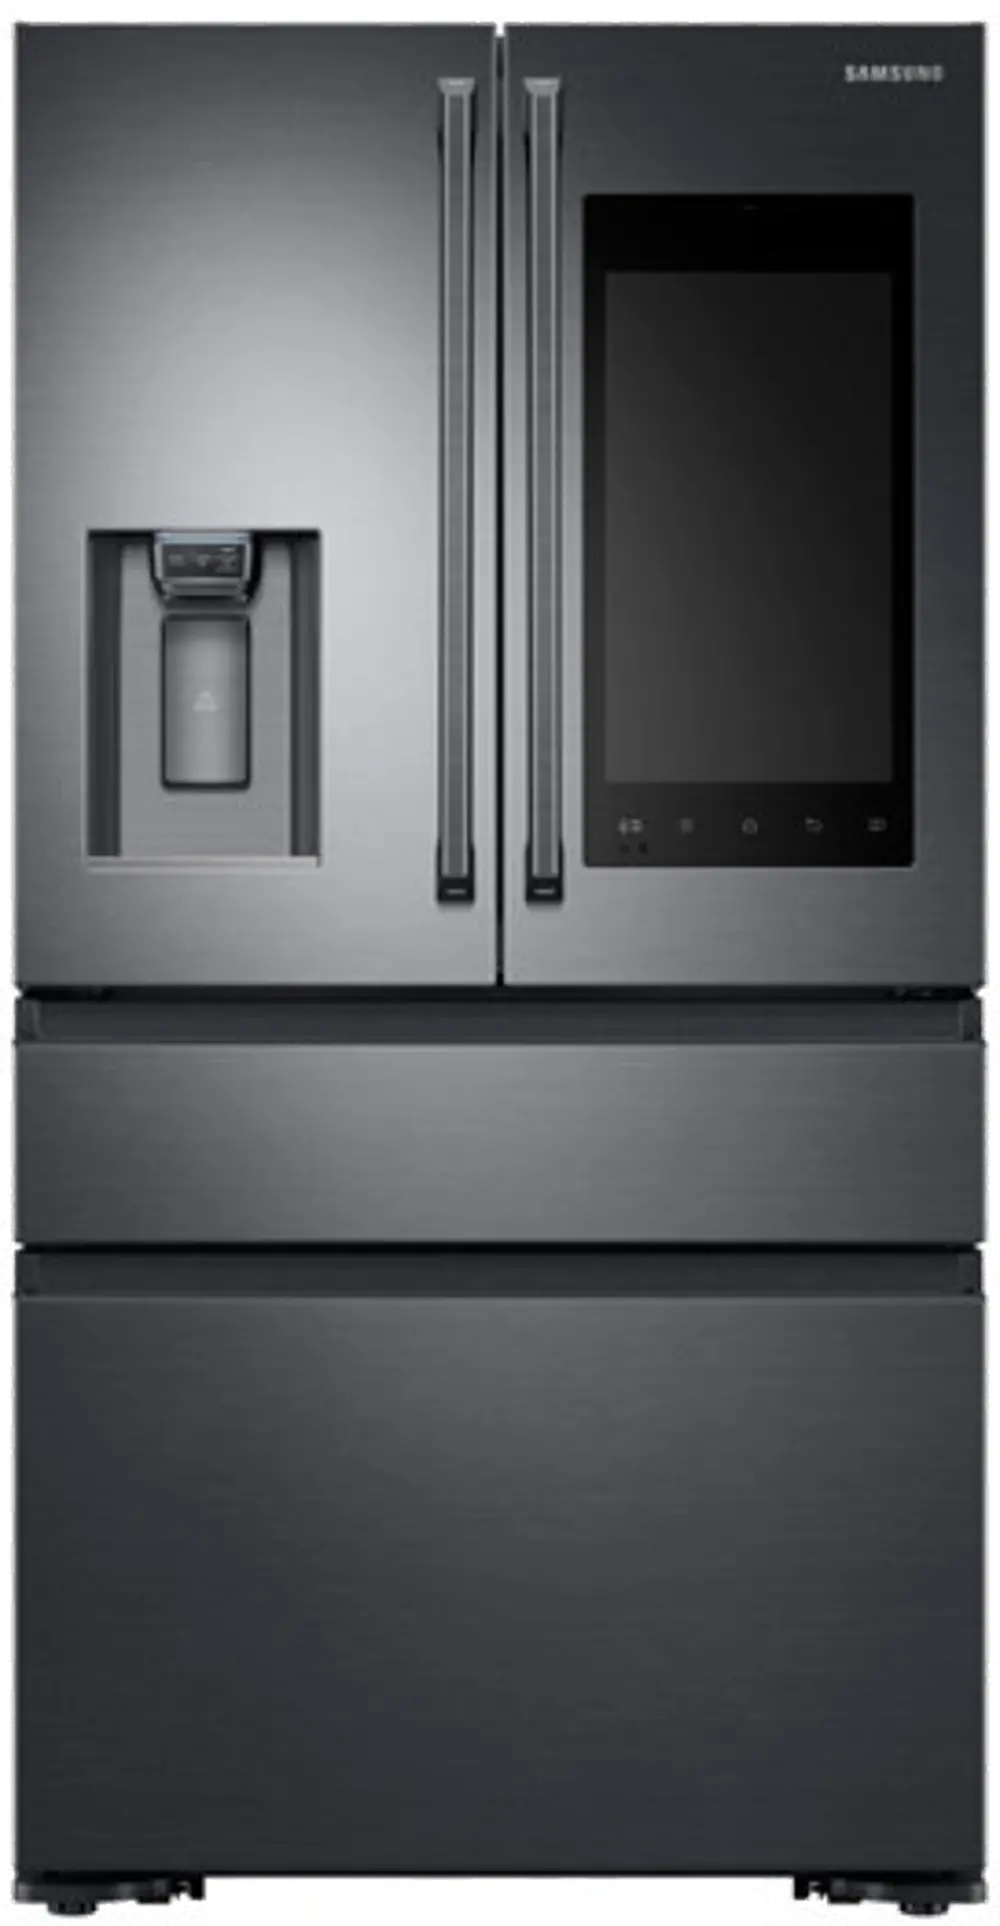 RF23M8090SG Samsung Counter Depth French Door Smart Refrigerator with FlexZone Drawer - 22.6 cu. ft., 36 Inch Black Stainless Steel-1